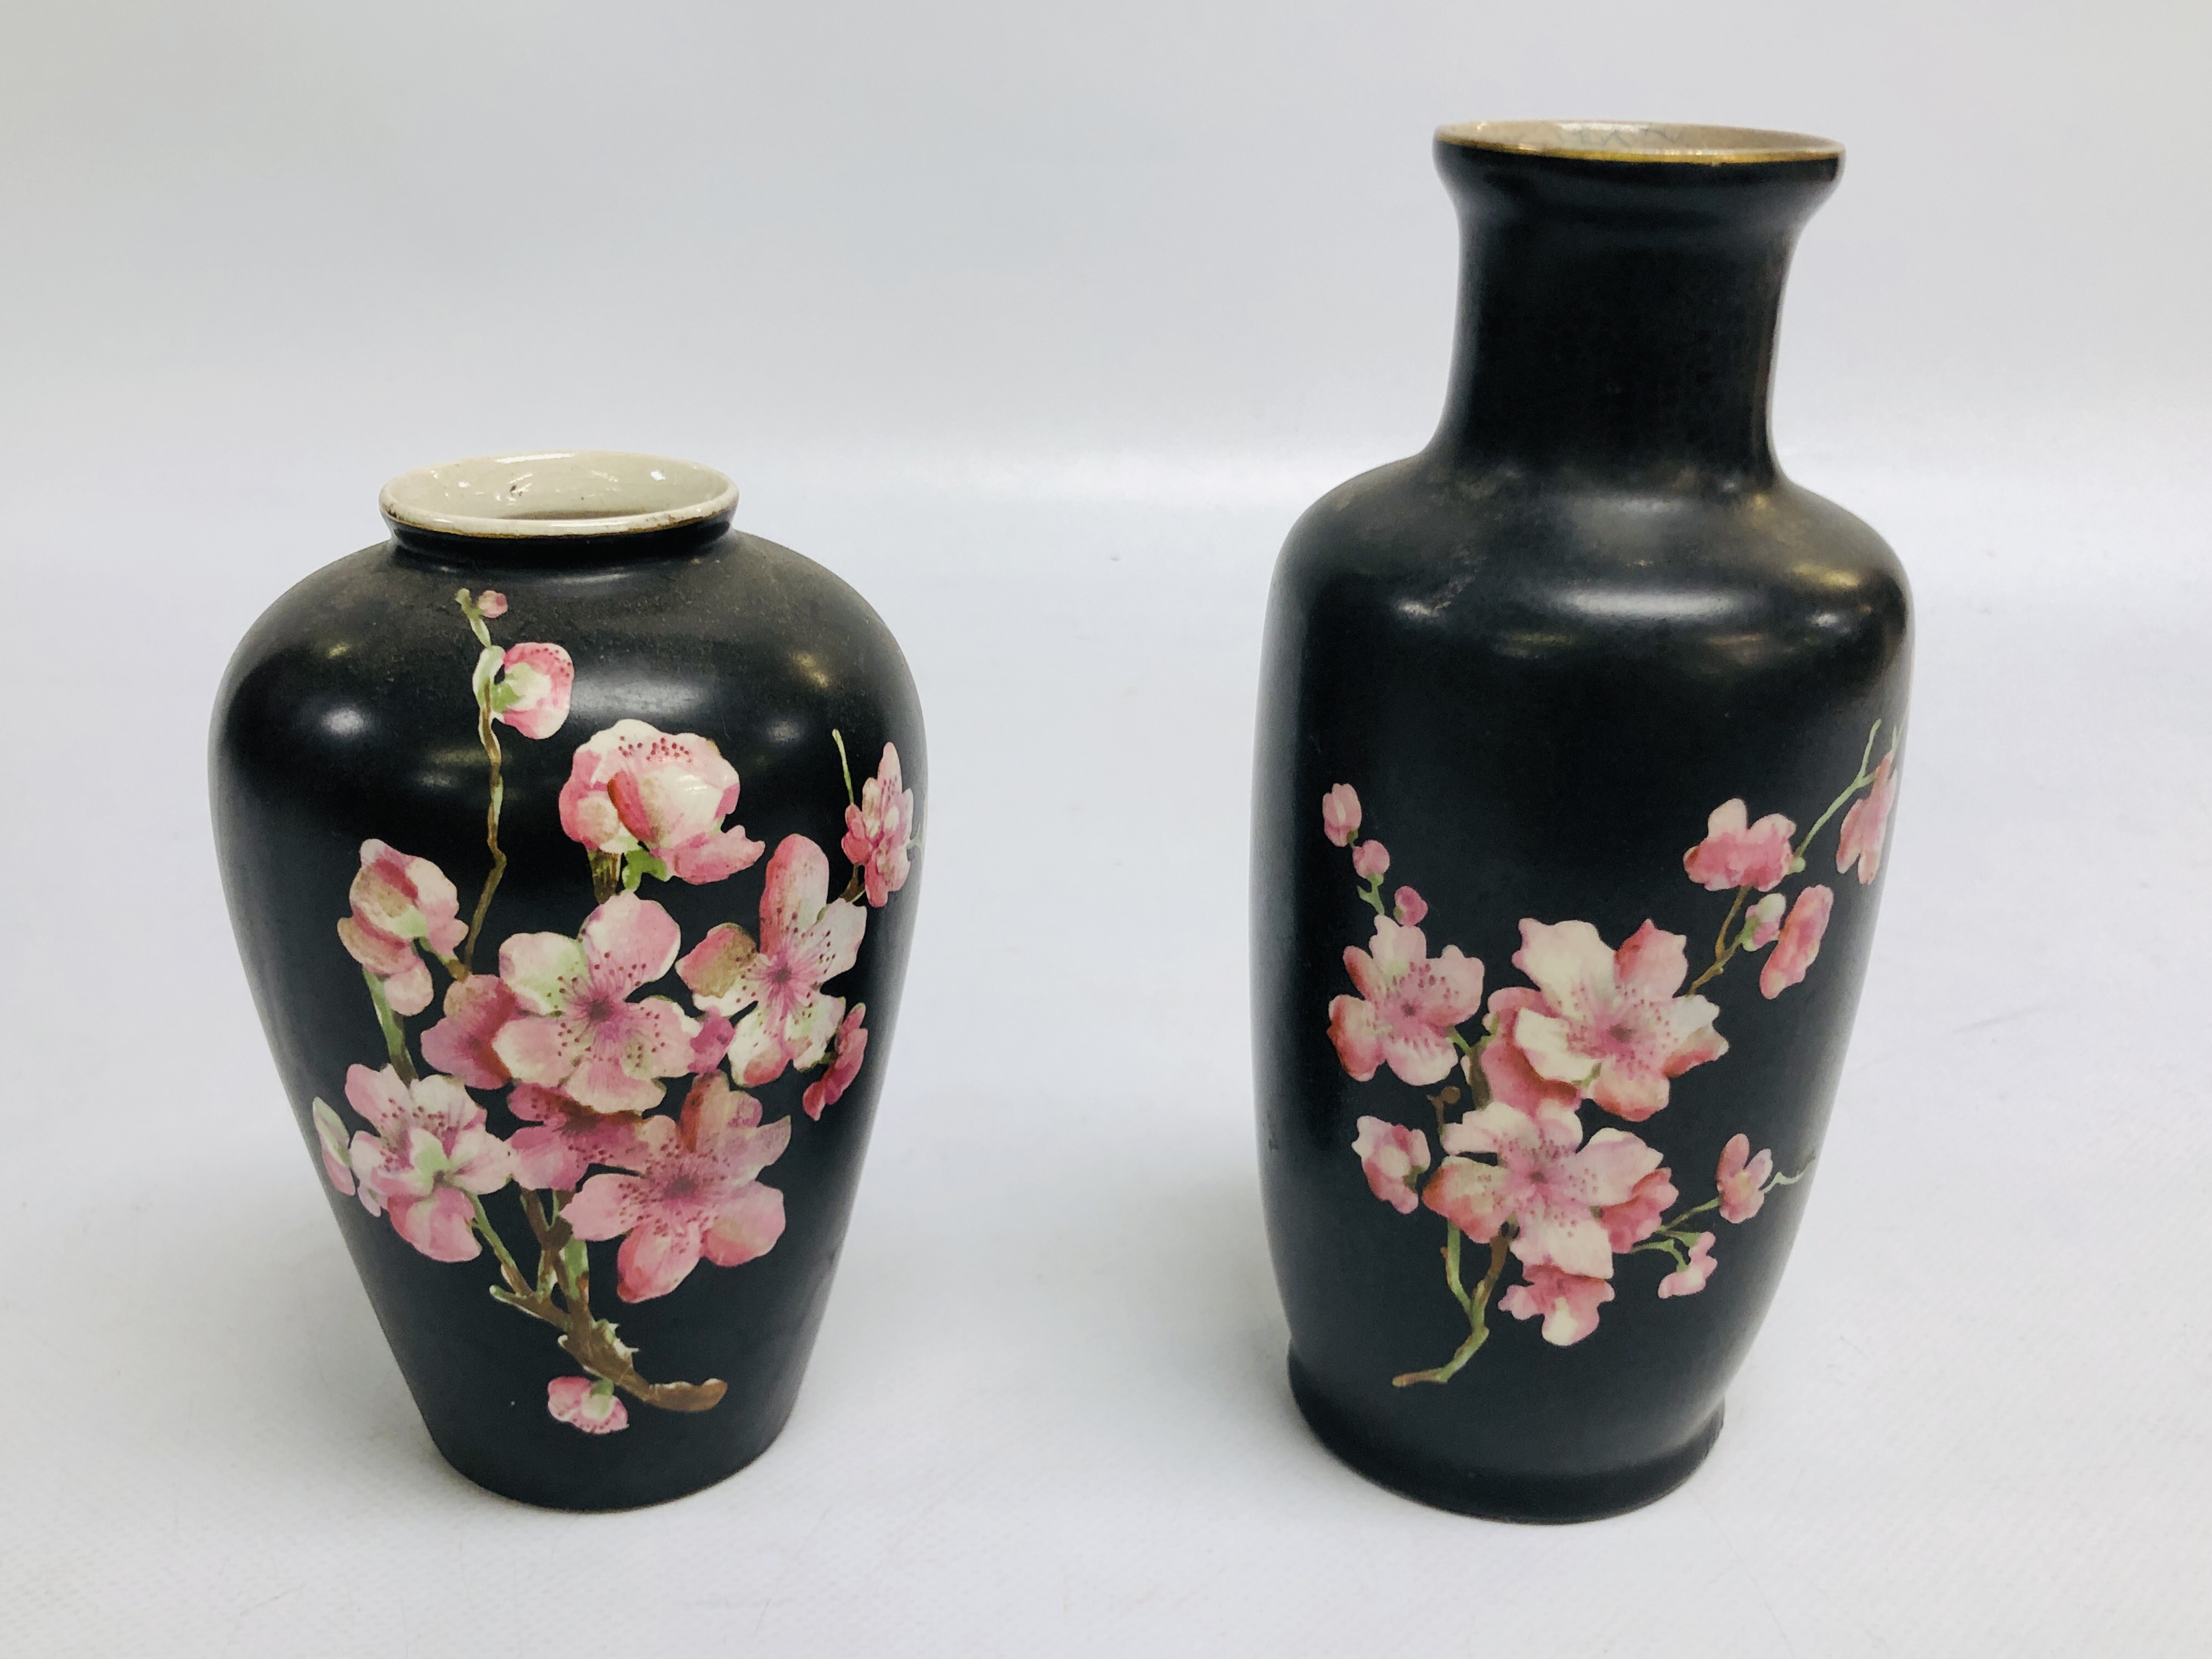 TWO SIMILAR STAFFORDSHIRE VASES DECORATED ON A BLACK GROUND WITH PRUNUS BLOSSOM, c. 1900.